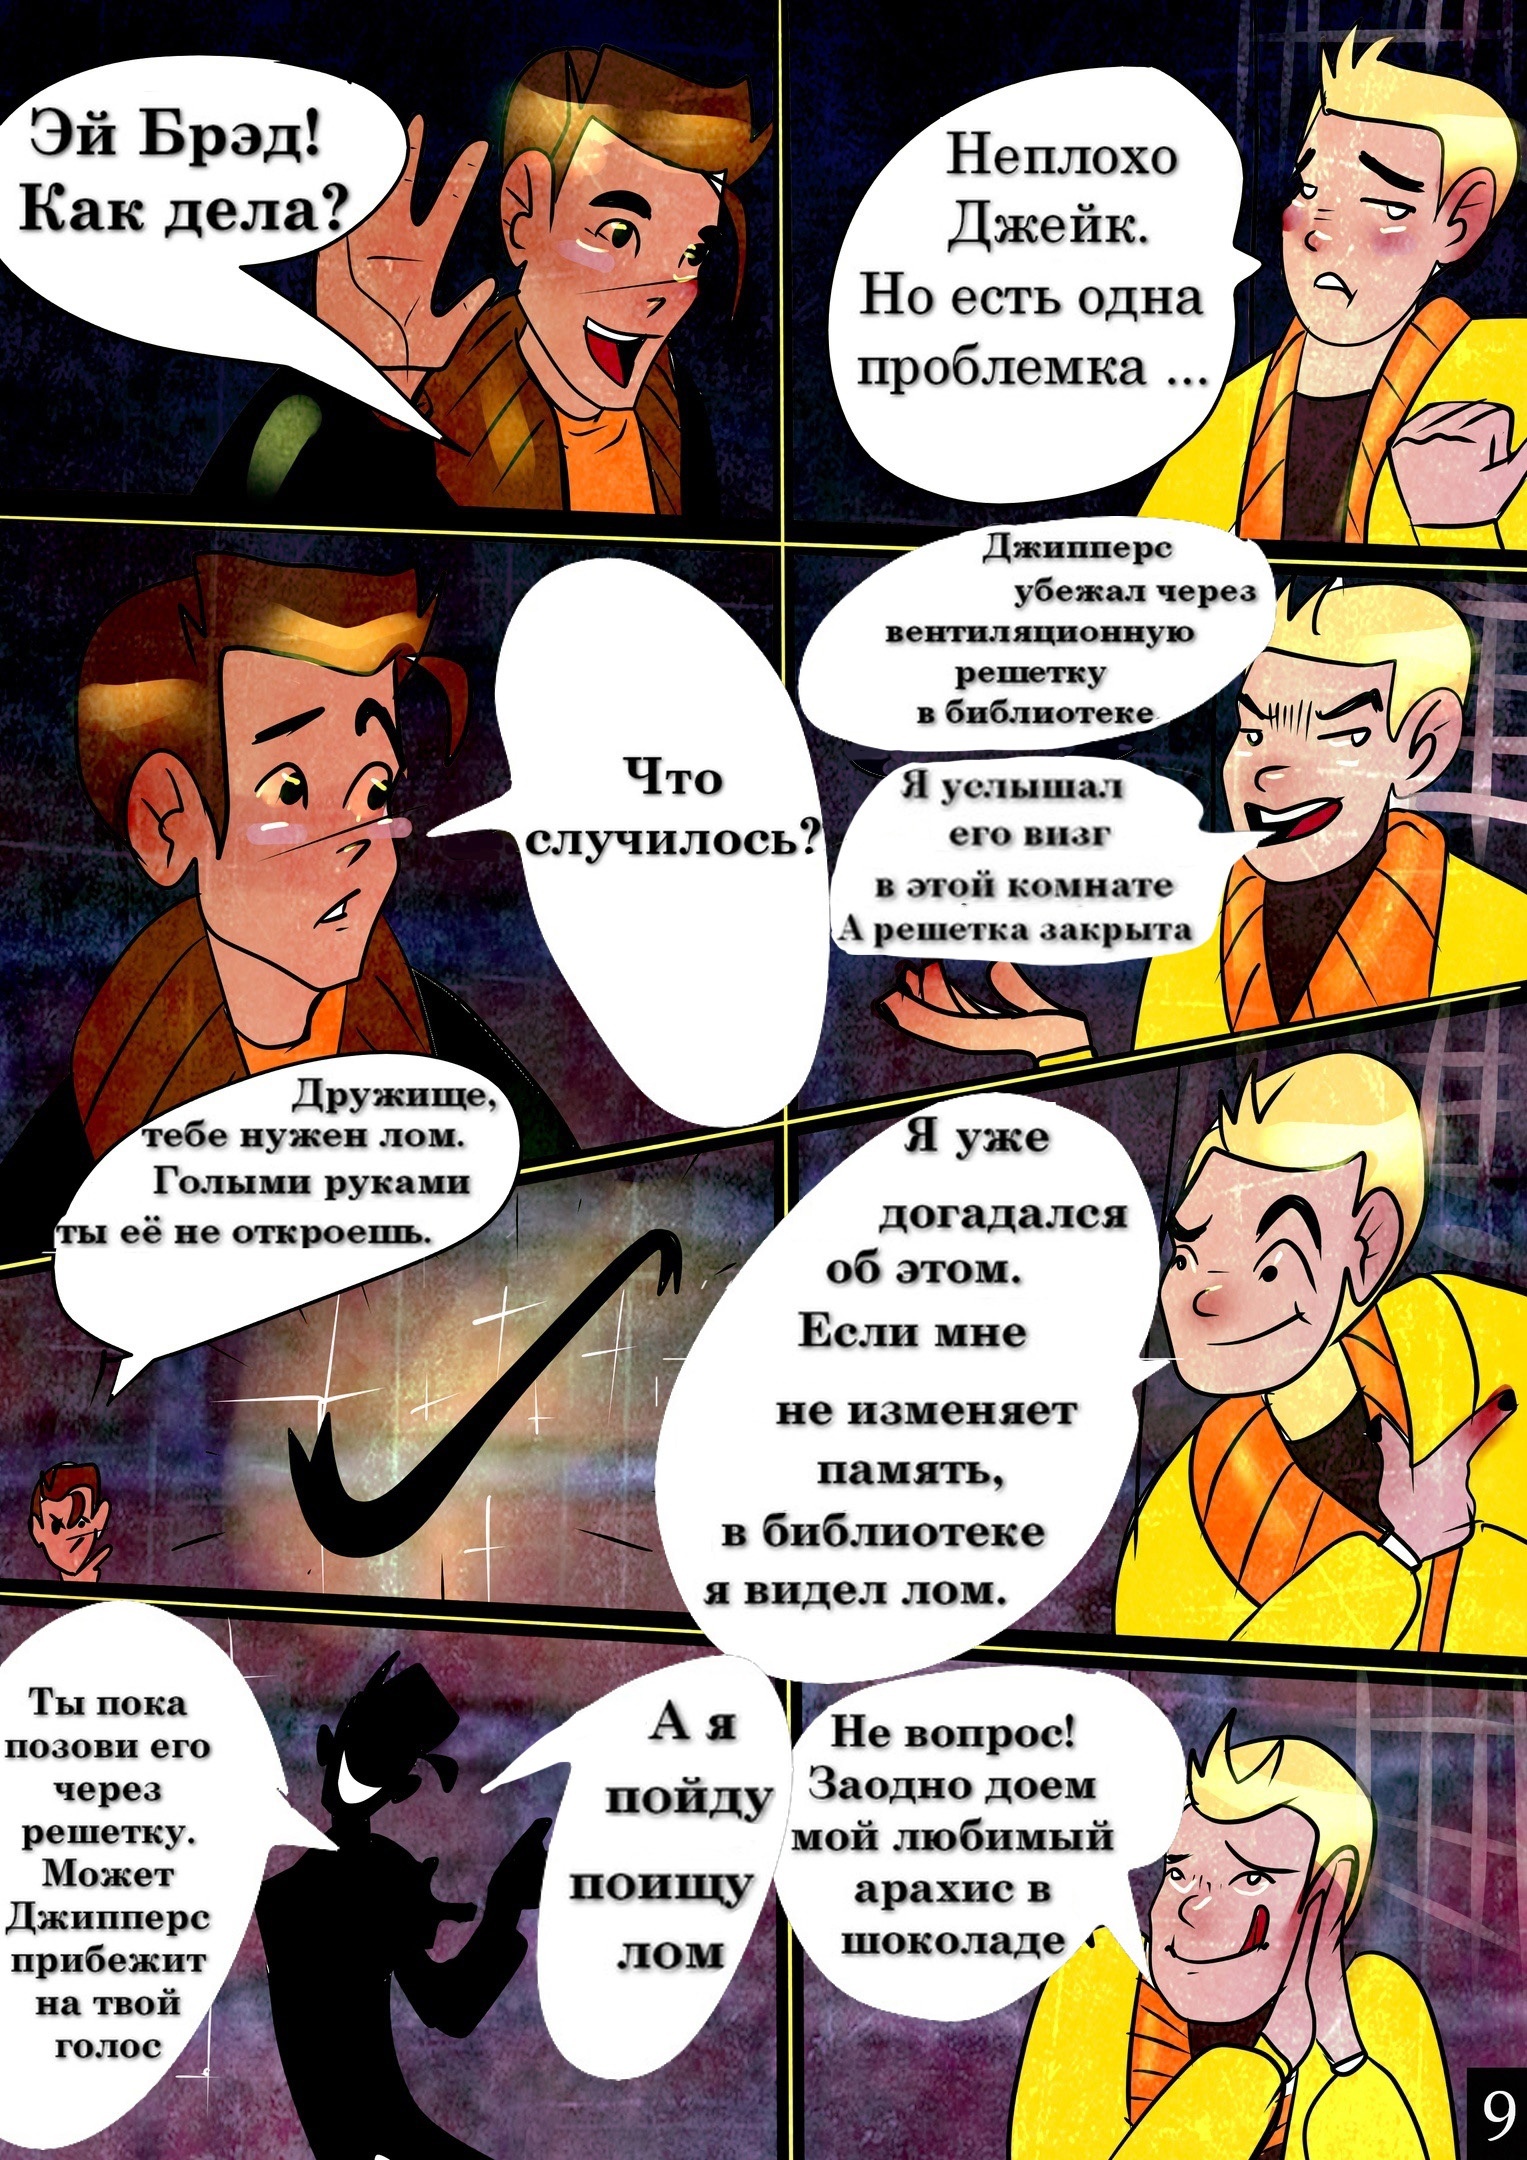 Club of riddles and secrets. First issue - My, Comics, 90th, Quest, Инди, Debut, Scooby Doo, Mystery, Lock, Video, Youtube, Longpost